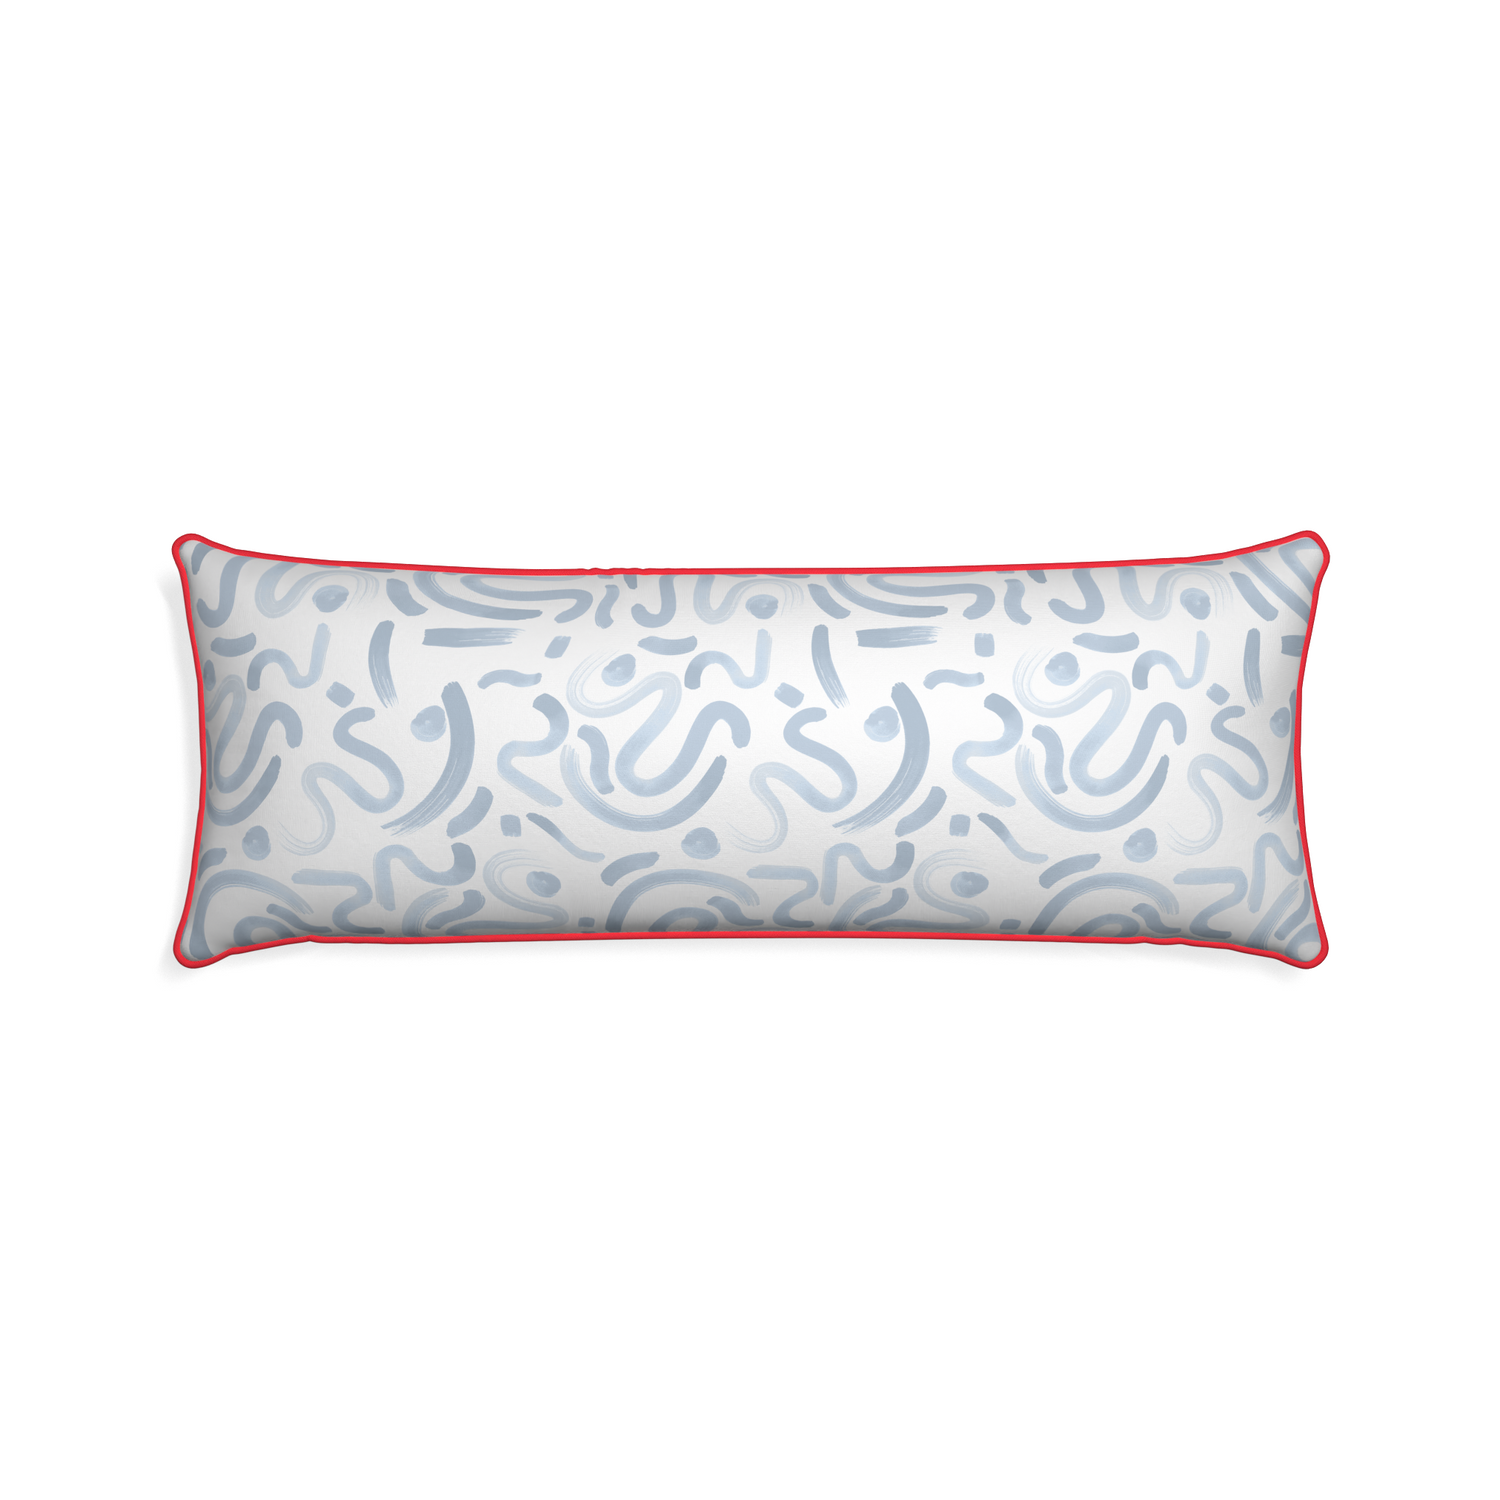 Xl-lumbar hockney sky custom abstract sky bluepillow with cherry piping on white background